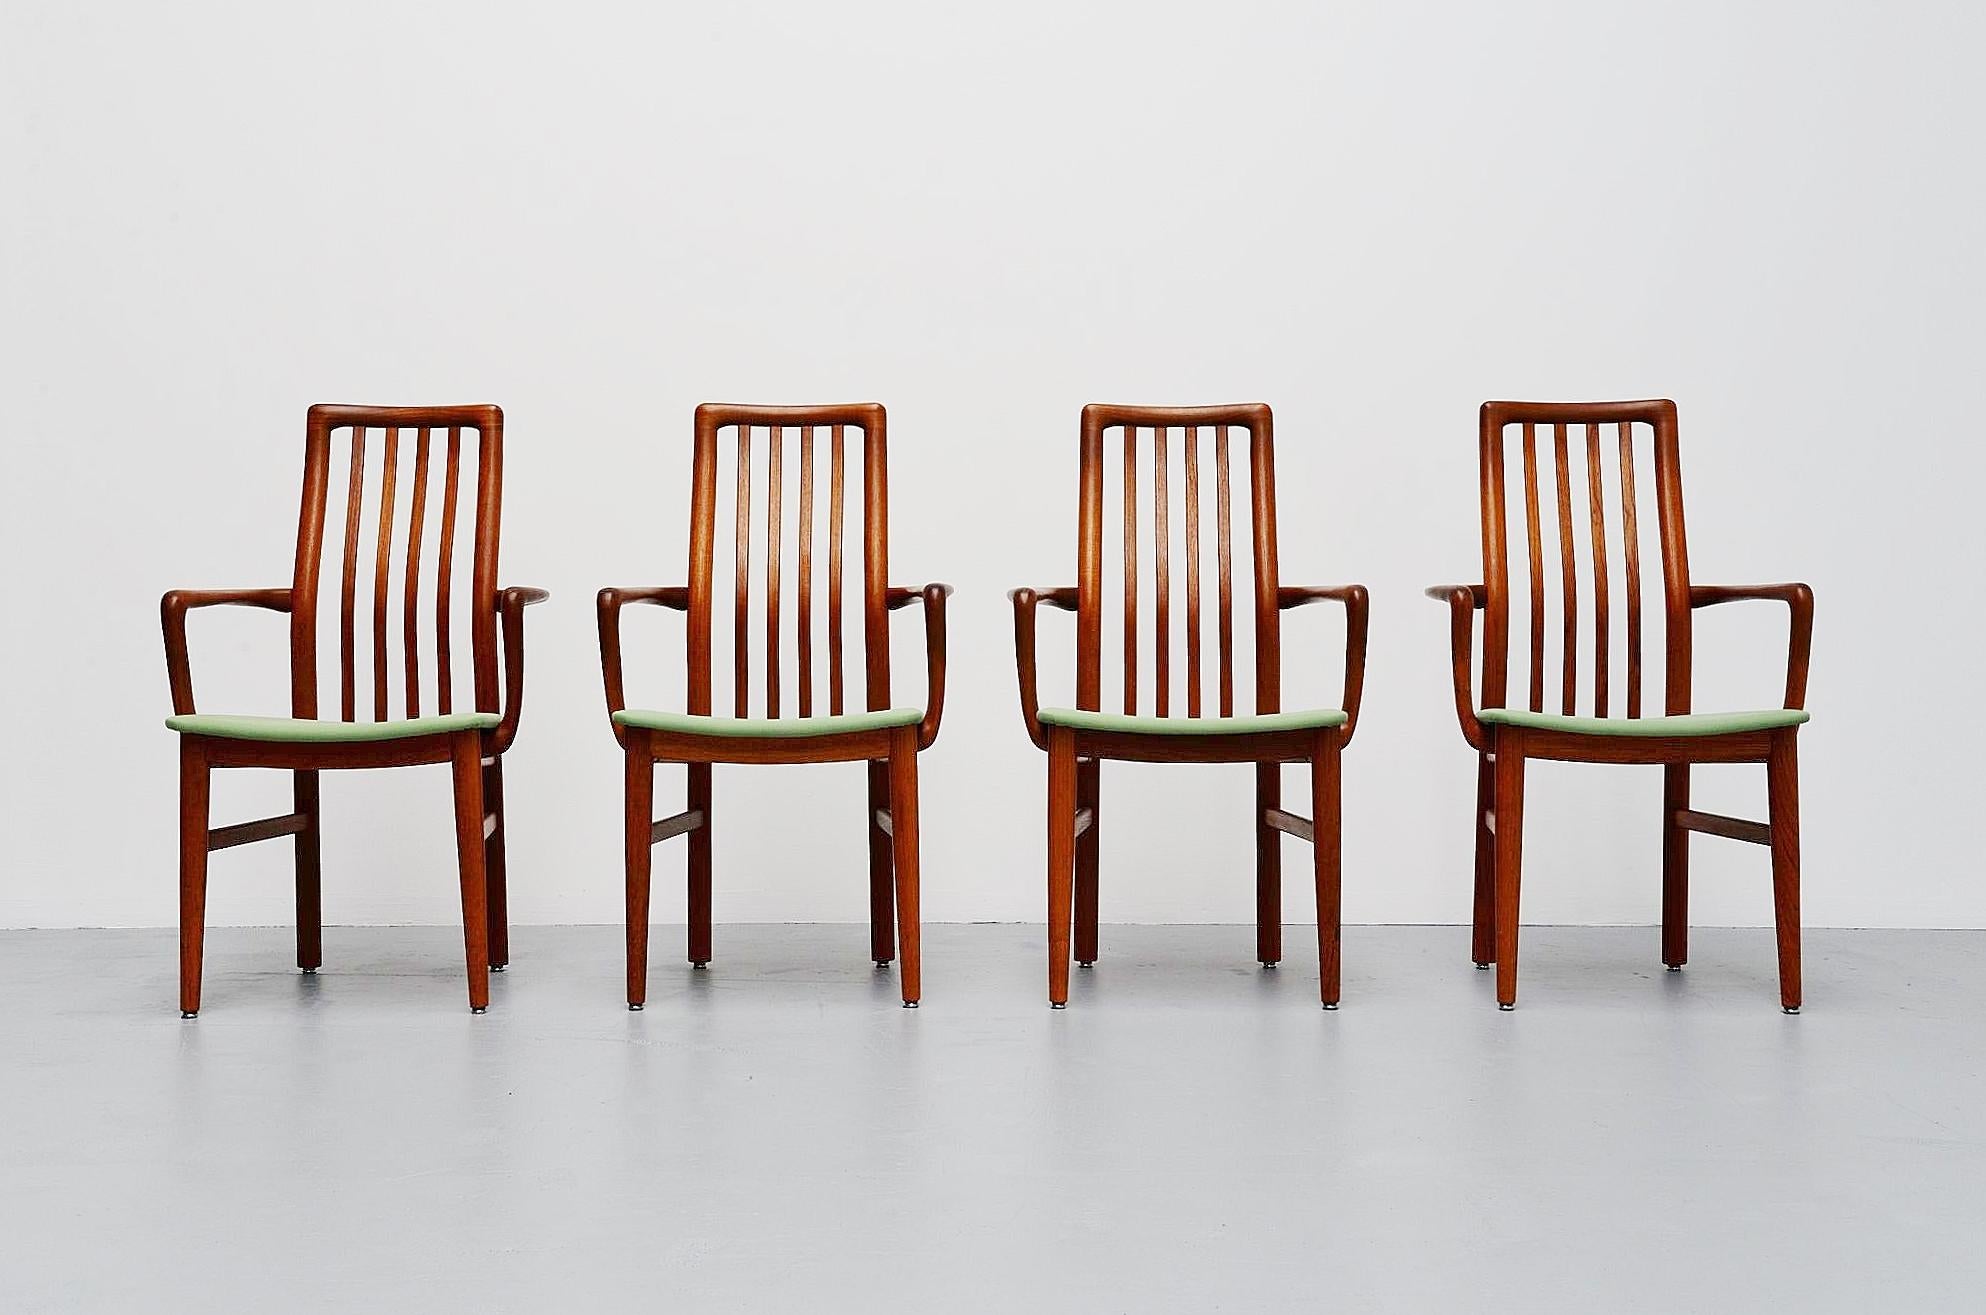 Very nice set of 4 armchairs designed by Niels Koefoed, manufactured by Hornslet Mobelfabrik, Denmark 1960. The chairs are made of solid teak wood and they are newly upholstered in mint green fabric. The arms have very nice dovetail connections at